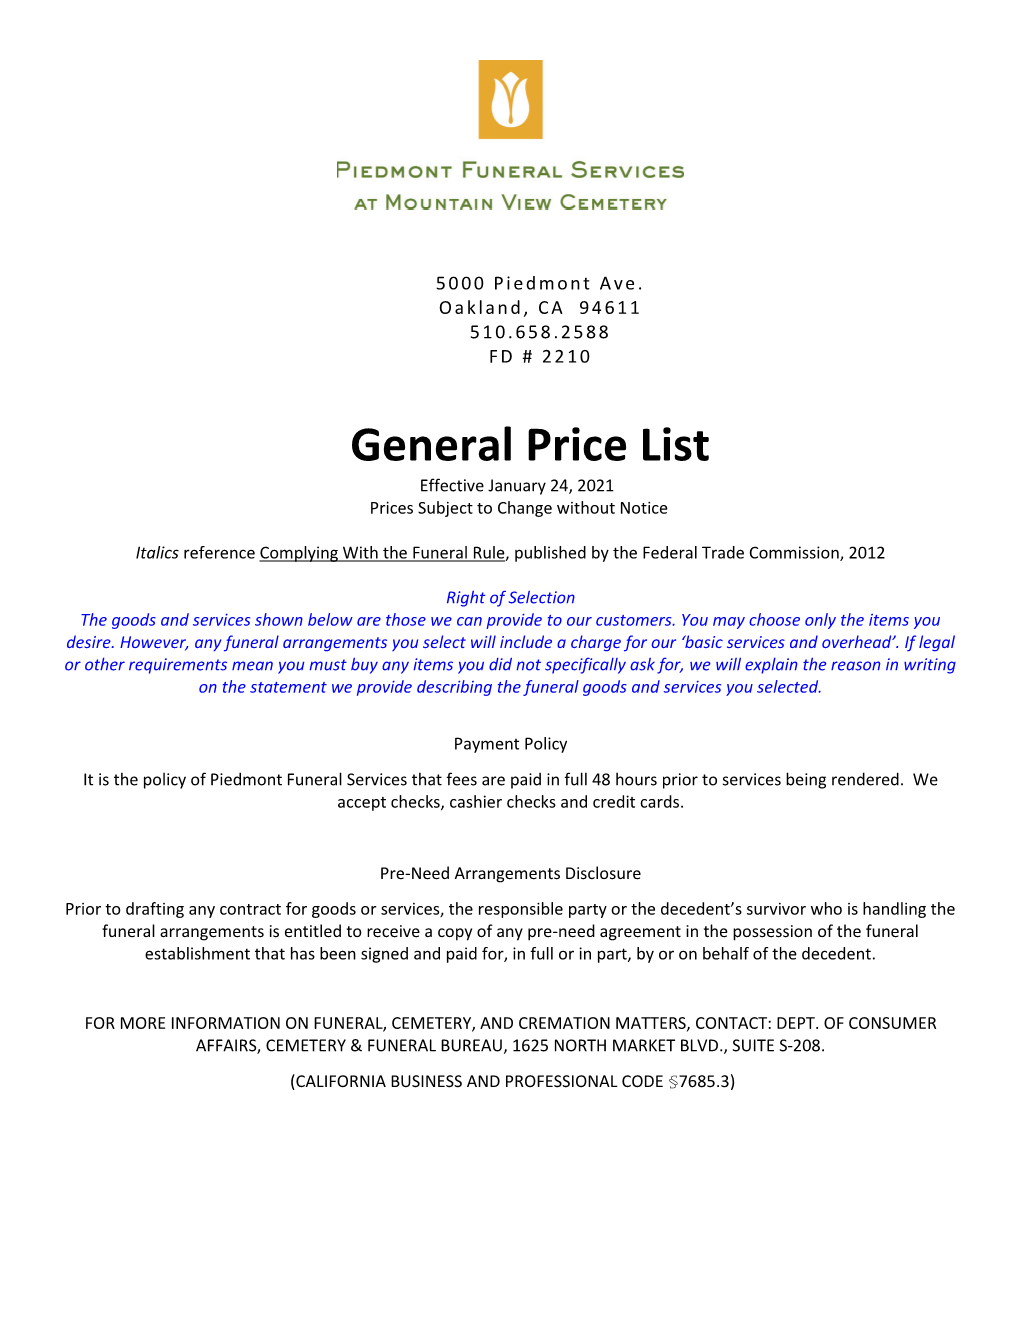 General Price List Effective January 24, 2021 Prices Subject to Change Without Notice